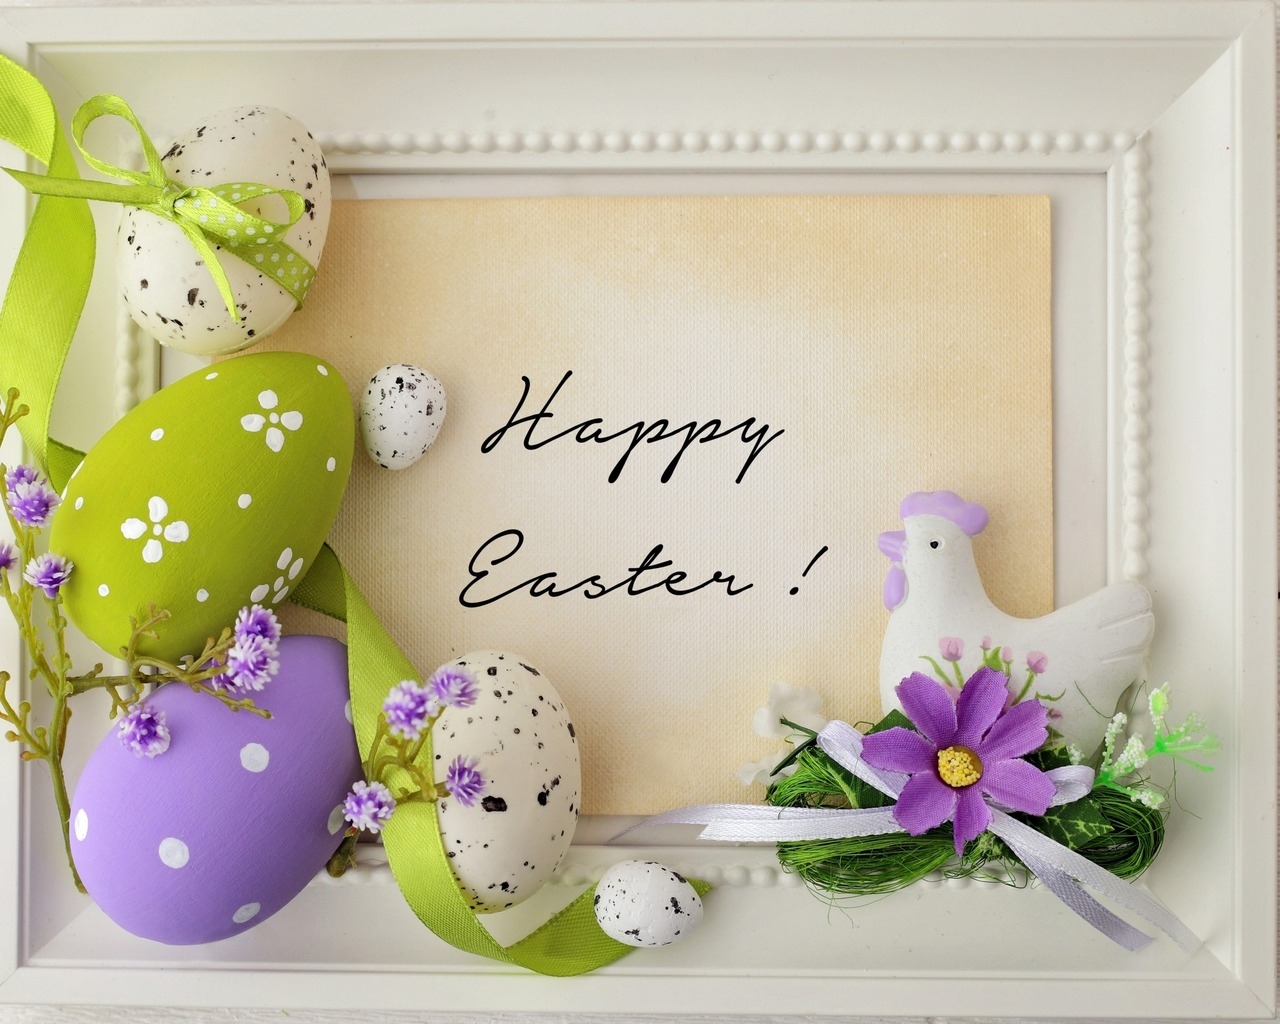 Happy Easter 2015 for 1280 x 1024 resolution